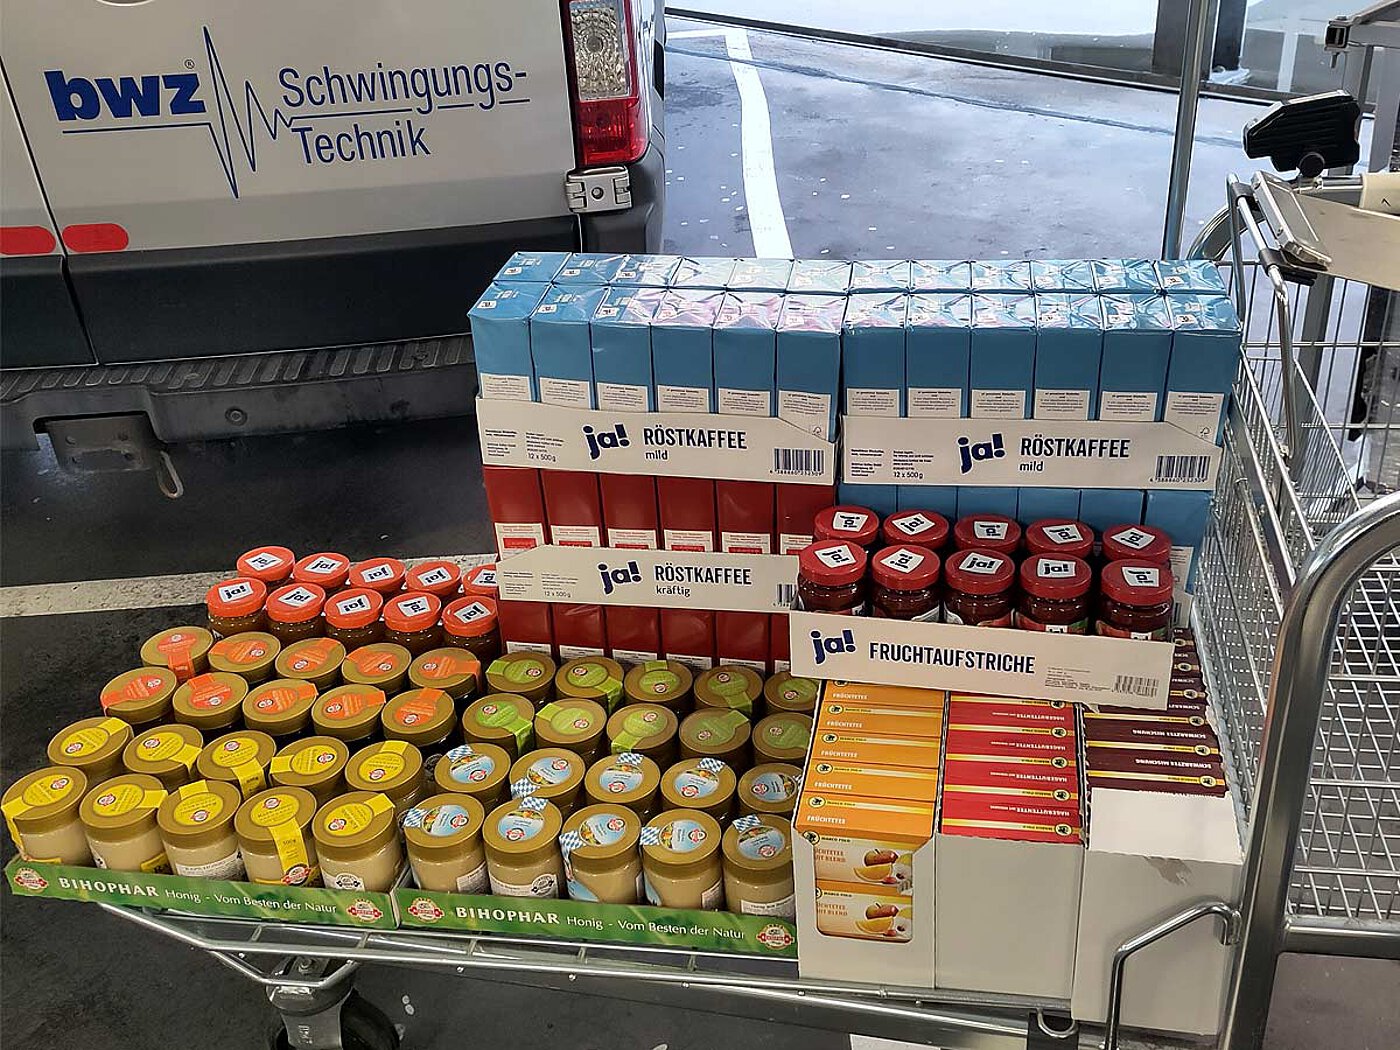 a C&C cart, loaded with trays of various packed food items, such as honey, tea, jams and filter coffee, in front of a silver-grey delivery van with the blue logo and script of company bwz Schwingungstechnik 